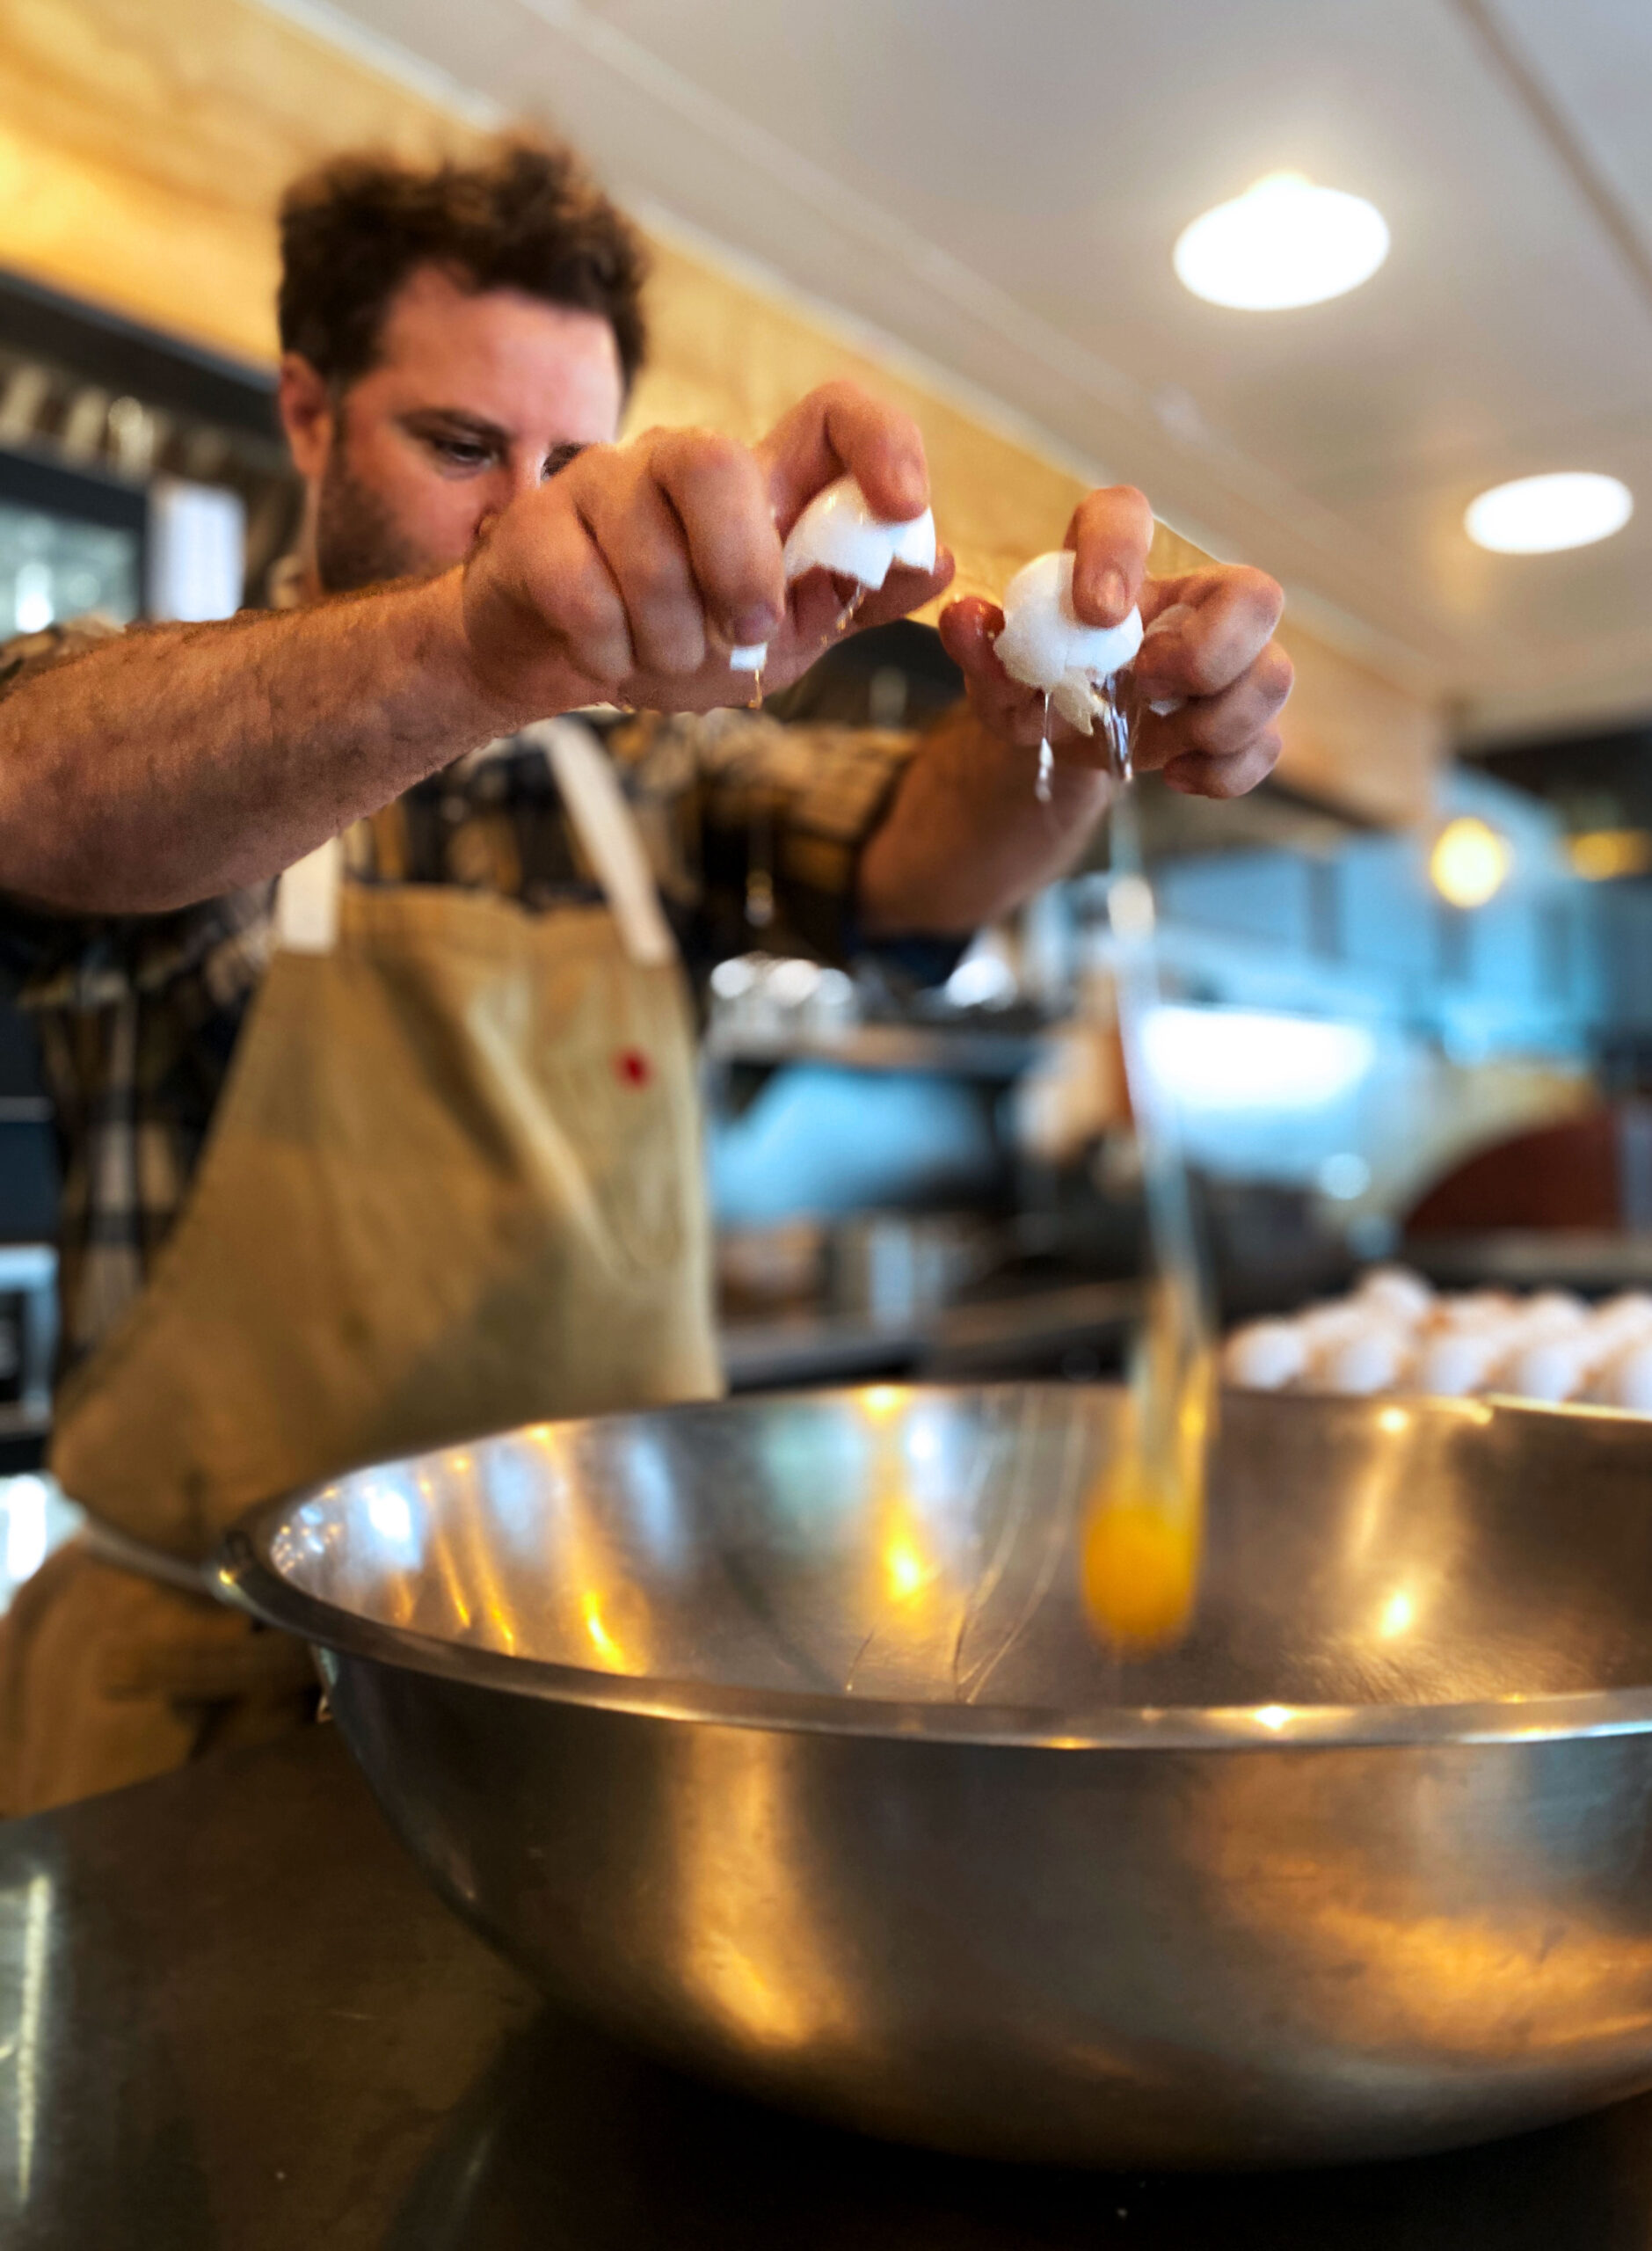 Chef Nathan Lemley cracking eggs over a stainless steel bowl.